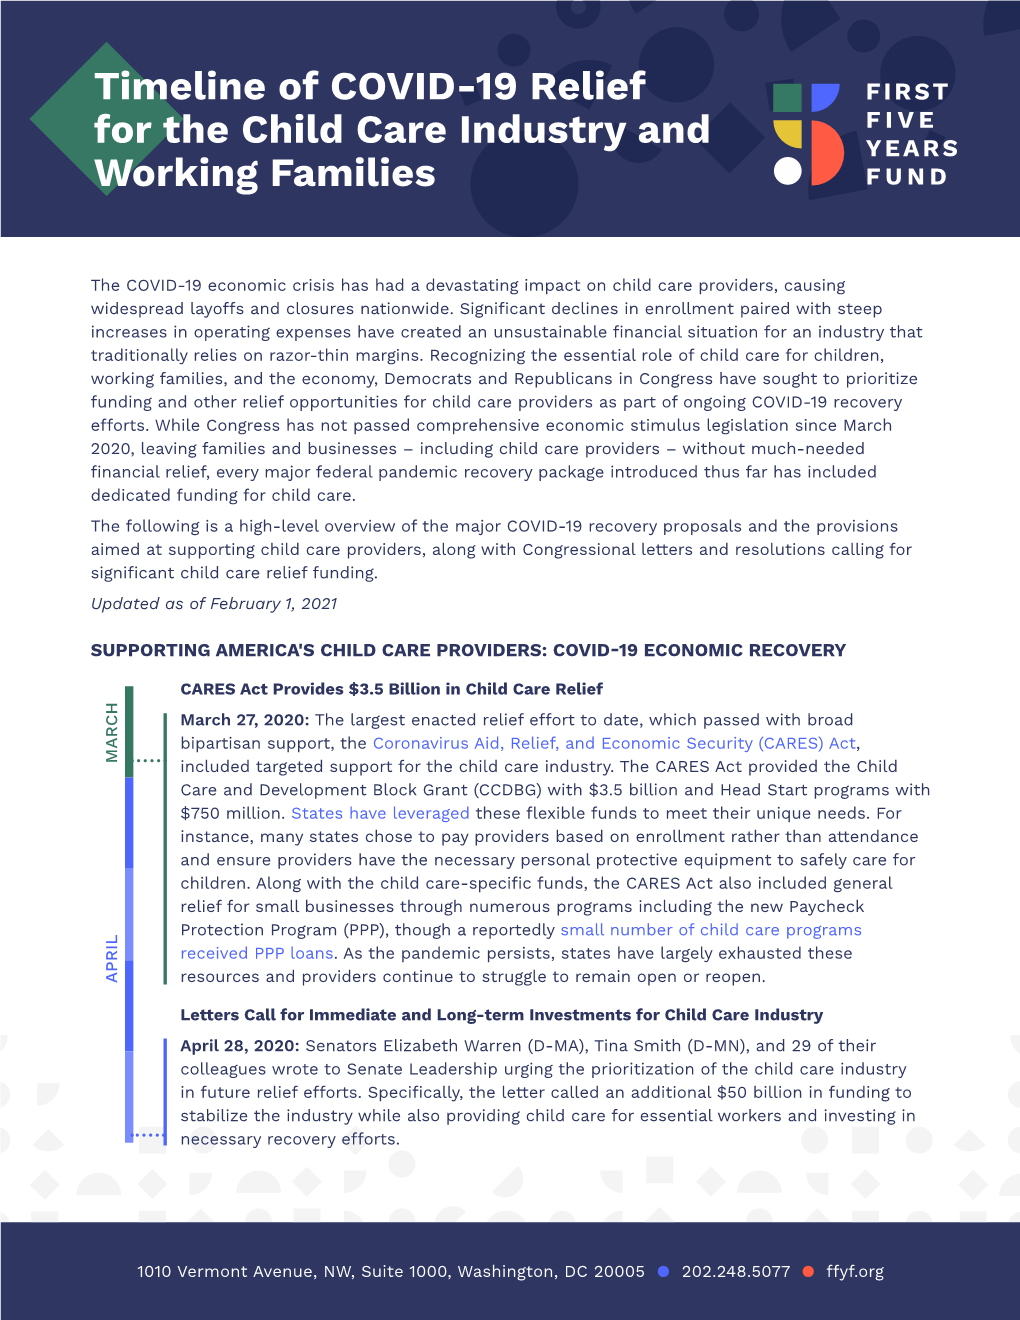 Timeline of COVID-19 Relief for the Child Care Industry and Working